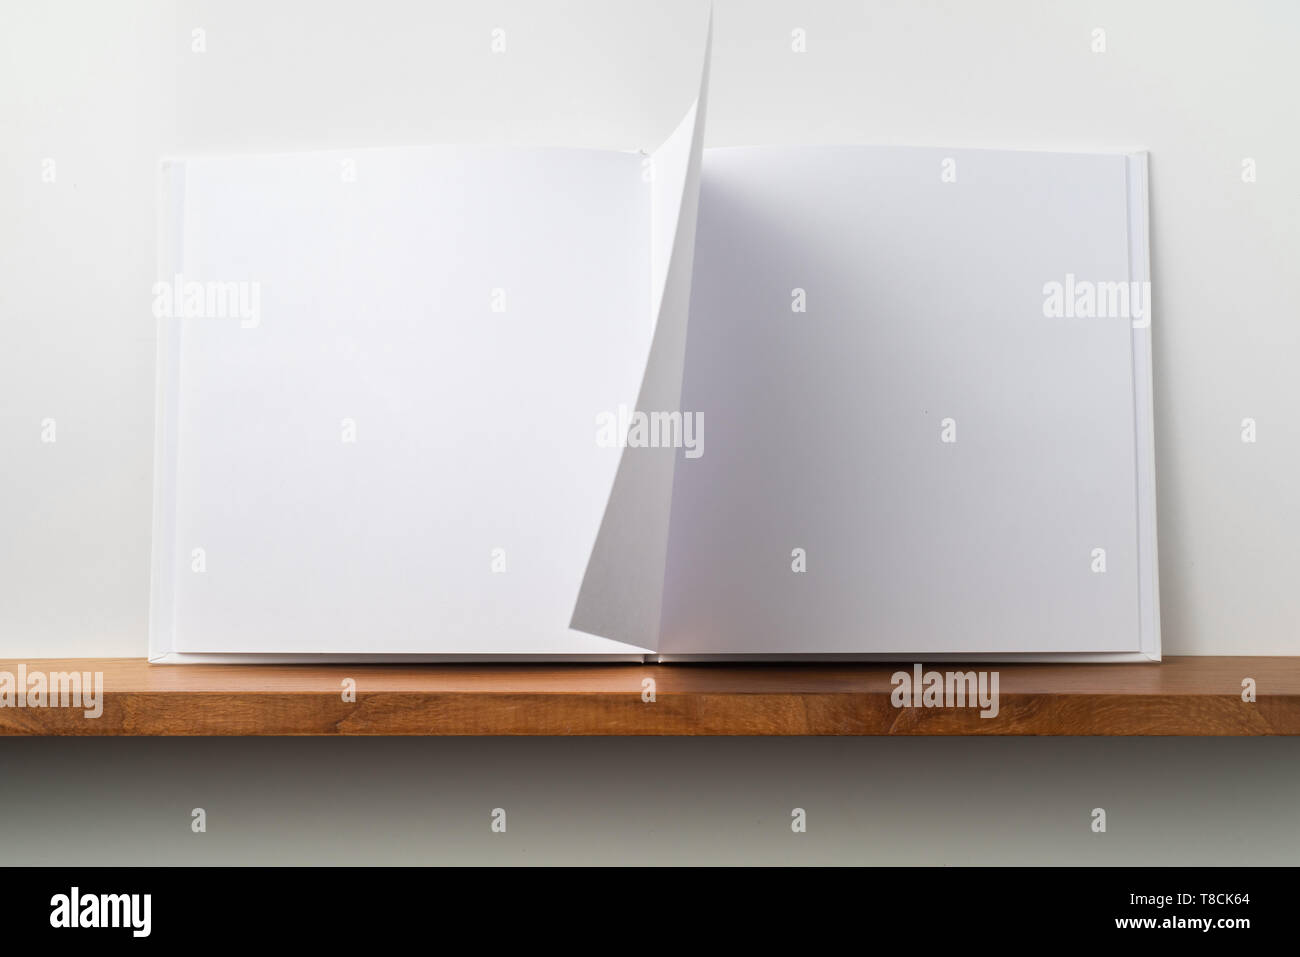 Design Concept Front View Of Open Square White Notebook On